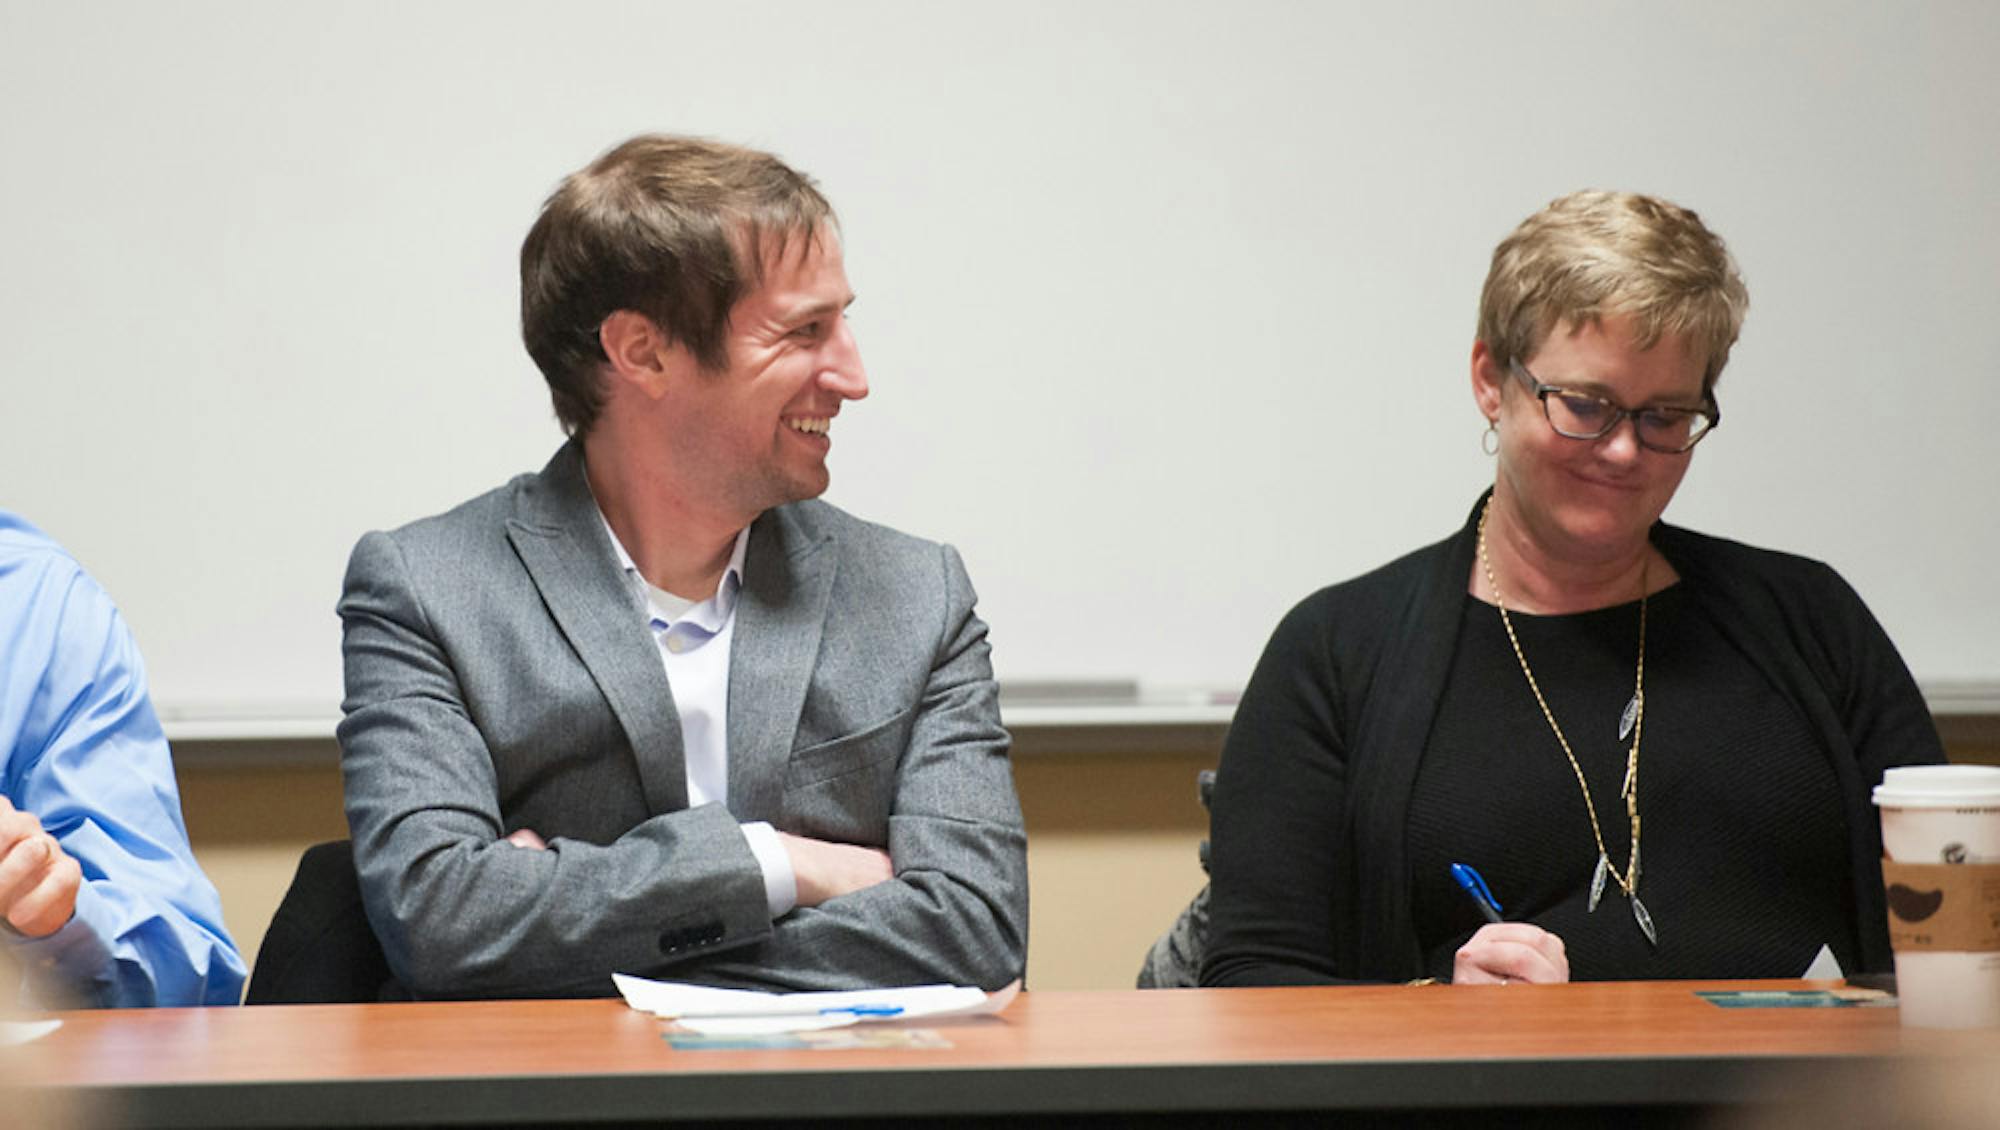 Panelists Kevin Donovan and Melissa Paulsen discuss effects of human dignity on developing countries.